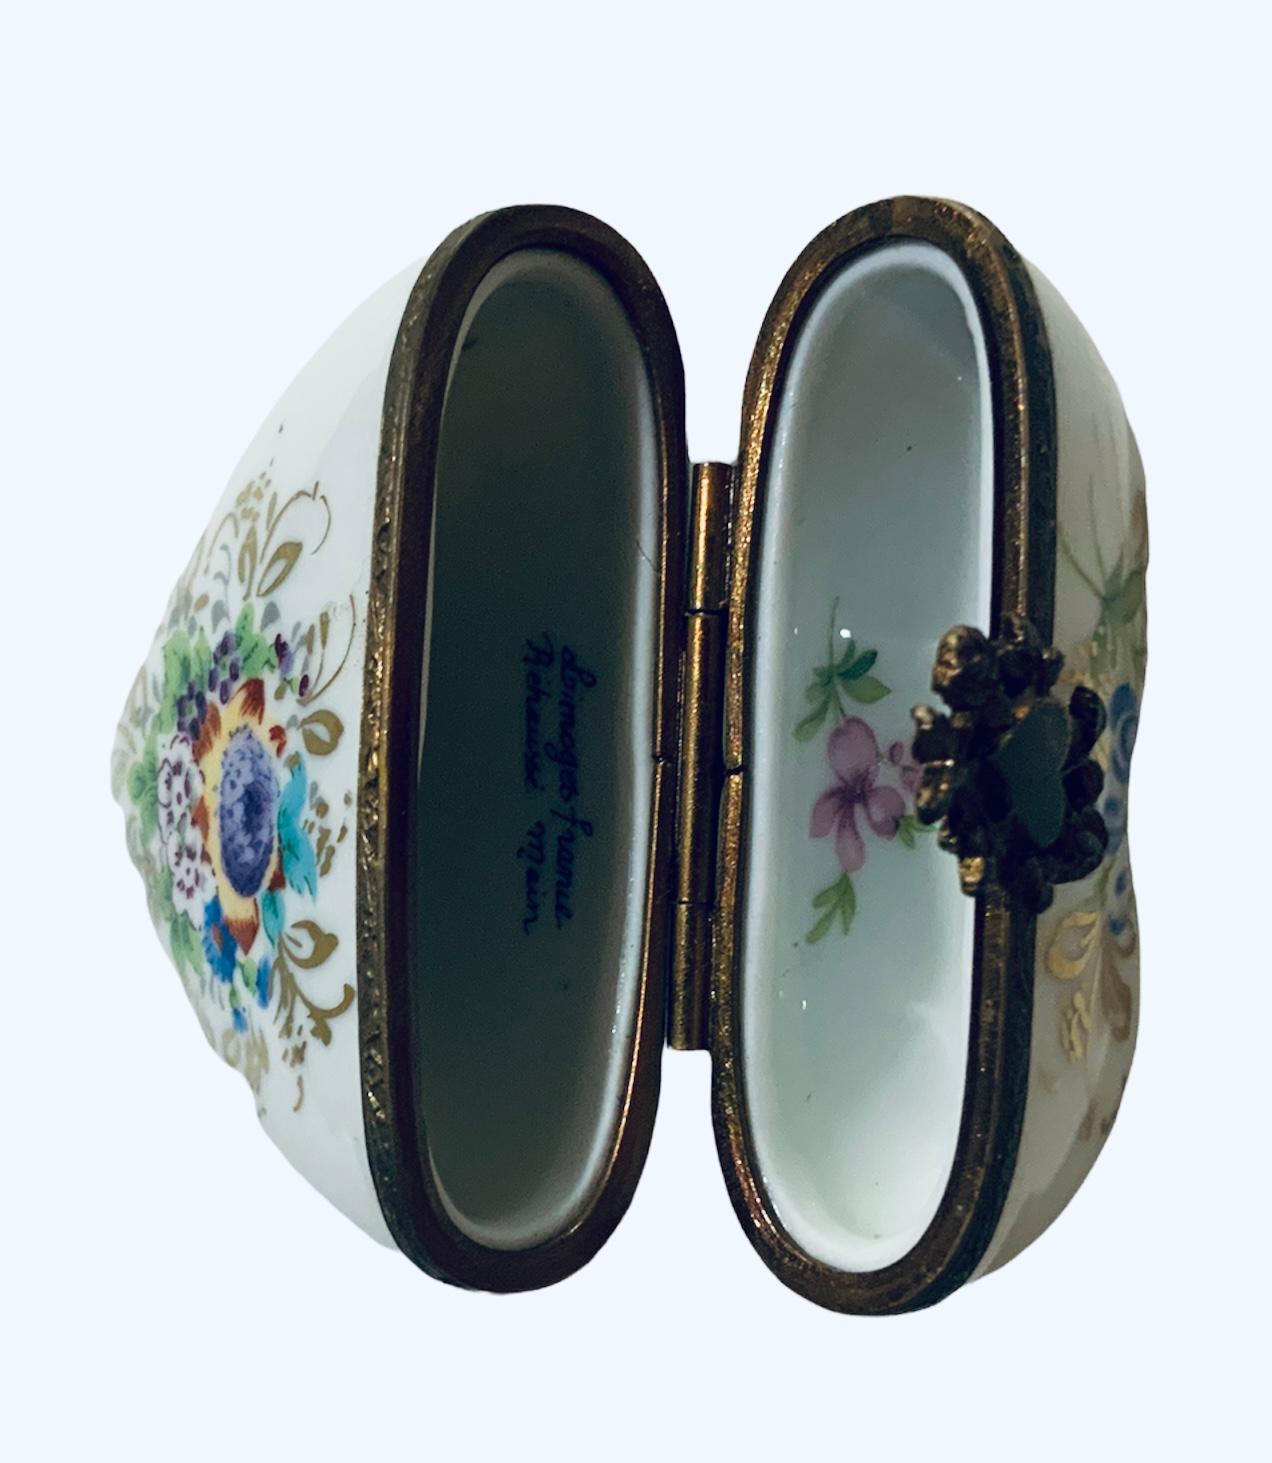 This is a Limoges France porcelain hand painted hinged trinket box. It is adorned with different bouquets of flowers with gilt branches around it and inside the lid. The clasp is a bronzed brass heart surrounded by foliage. It is signed Limoges,